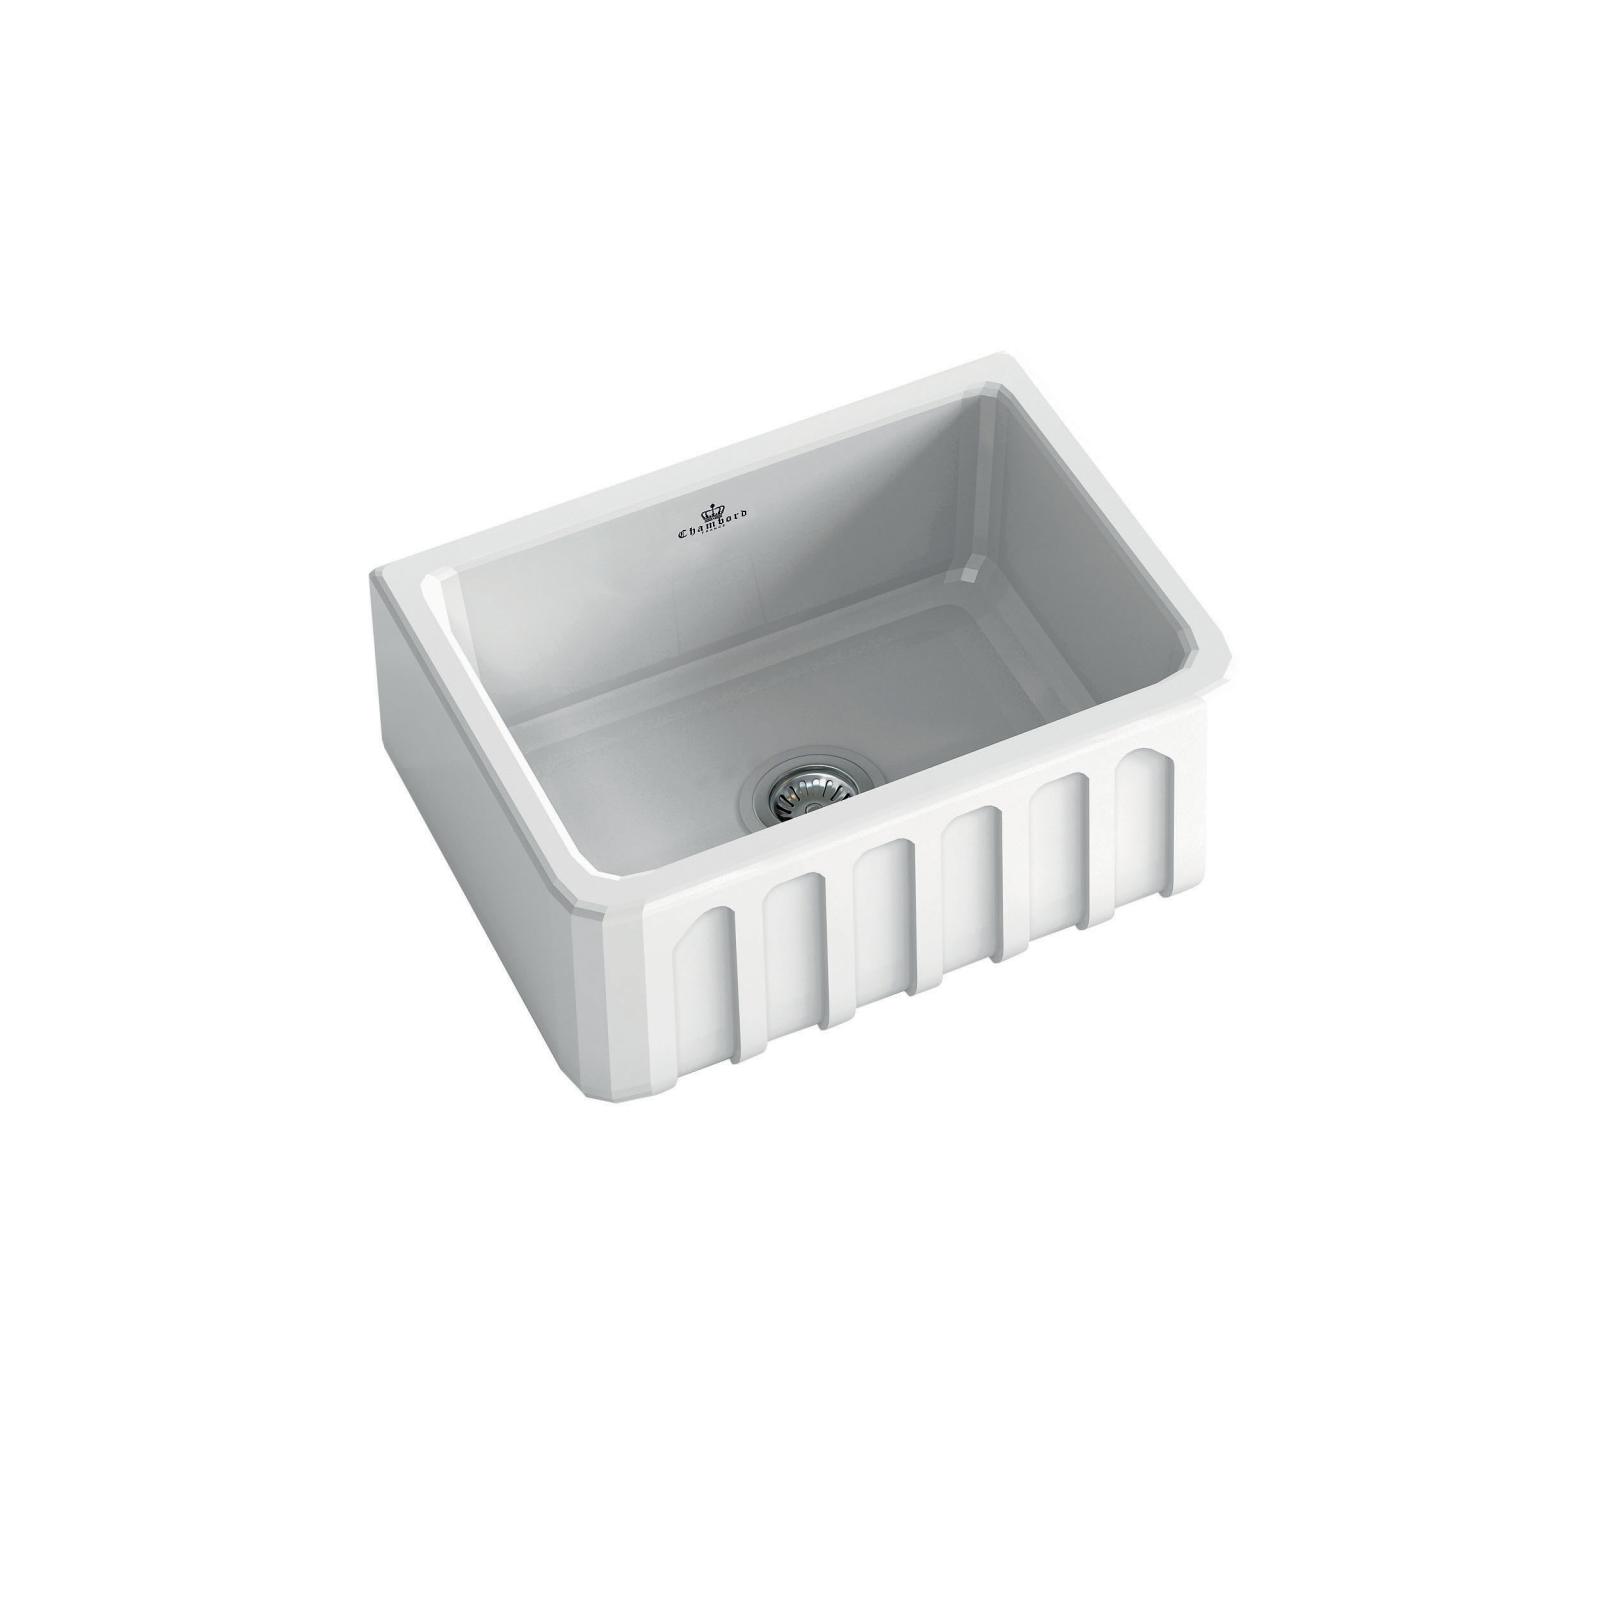 High-quality sink Louis I - single bowl, ceramic - ambience 3